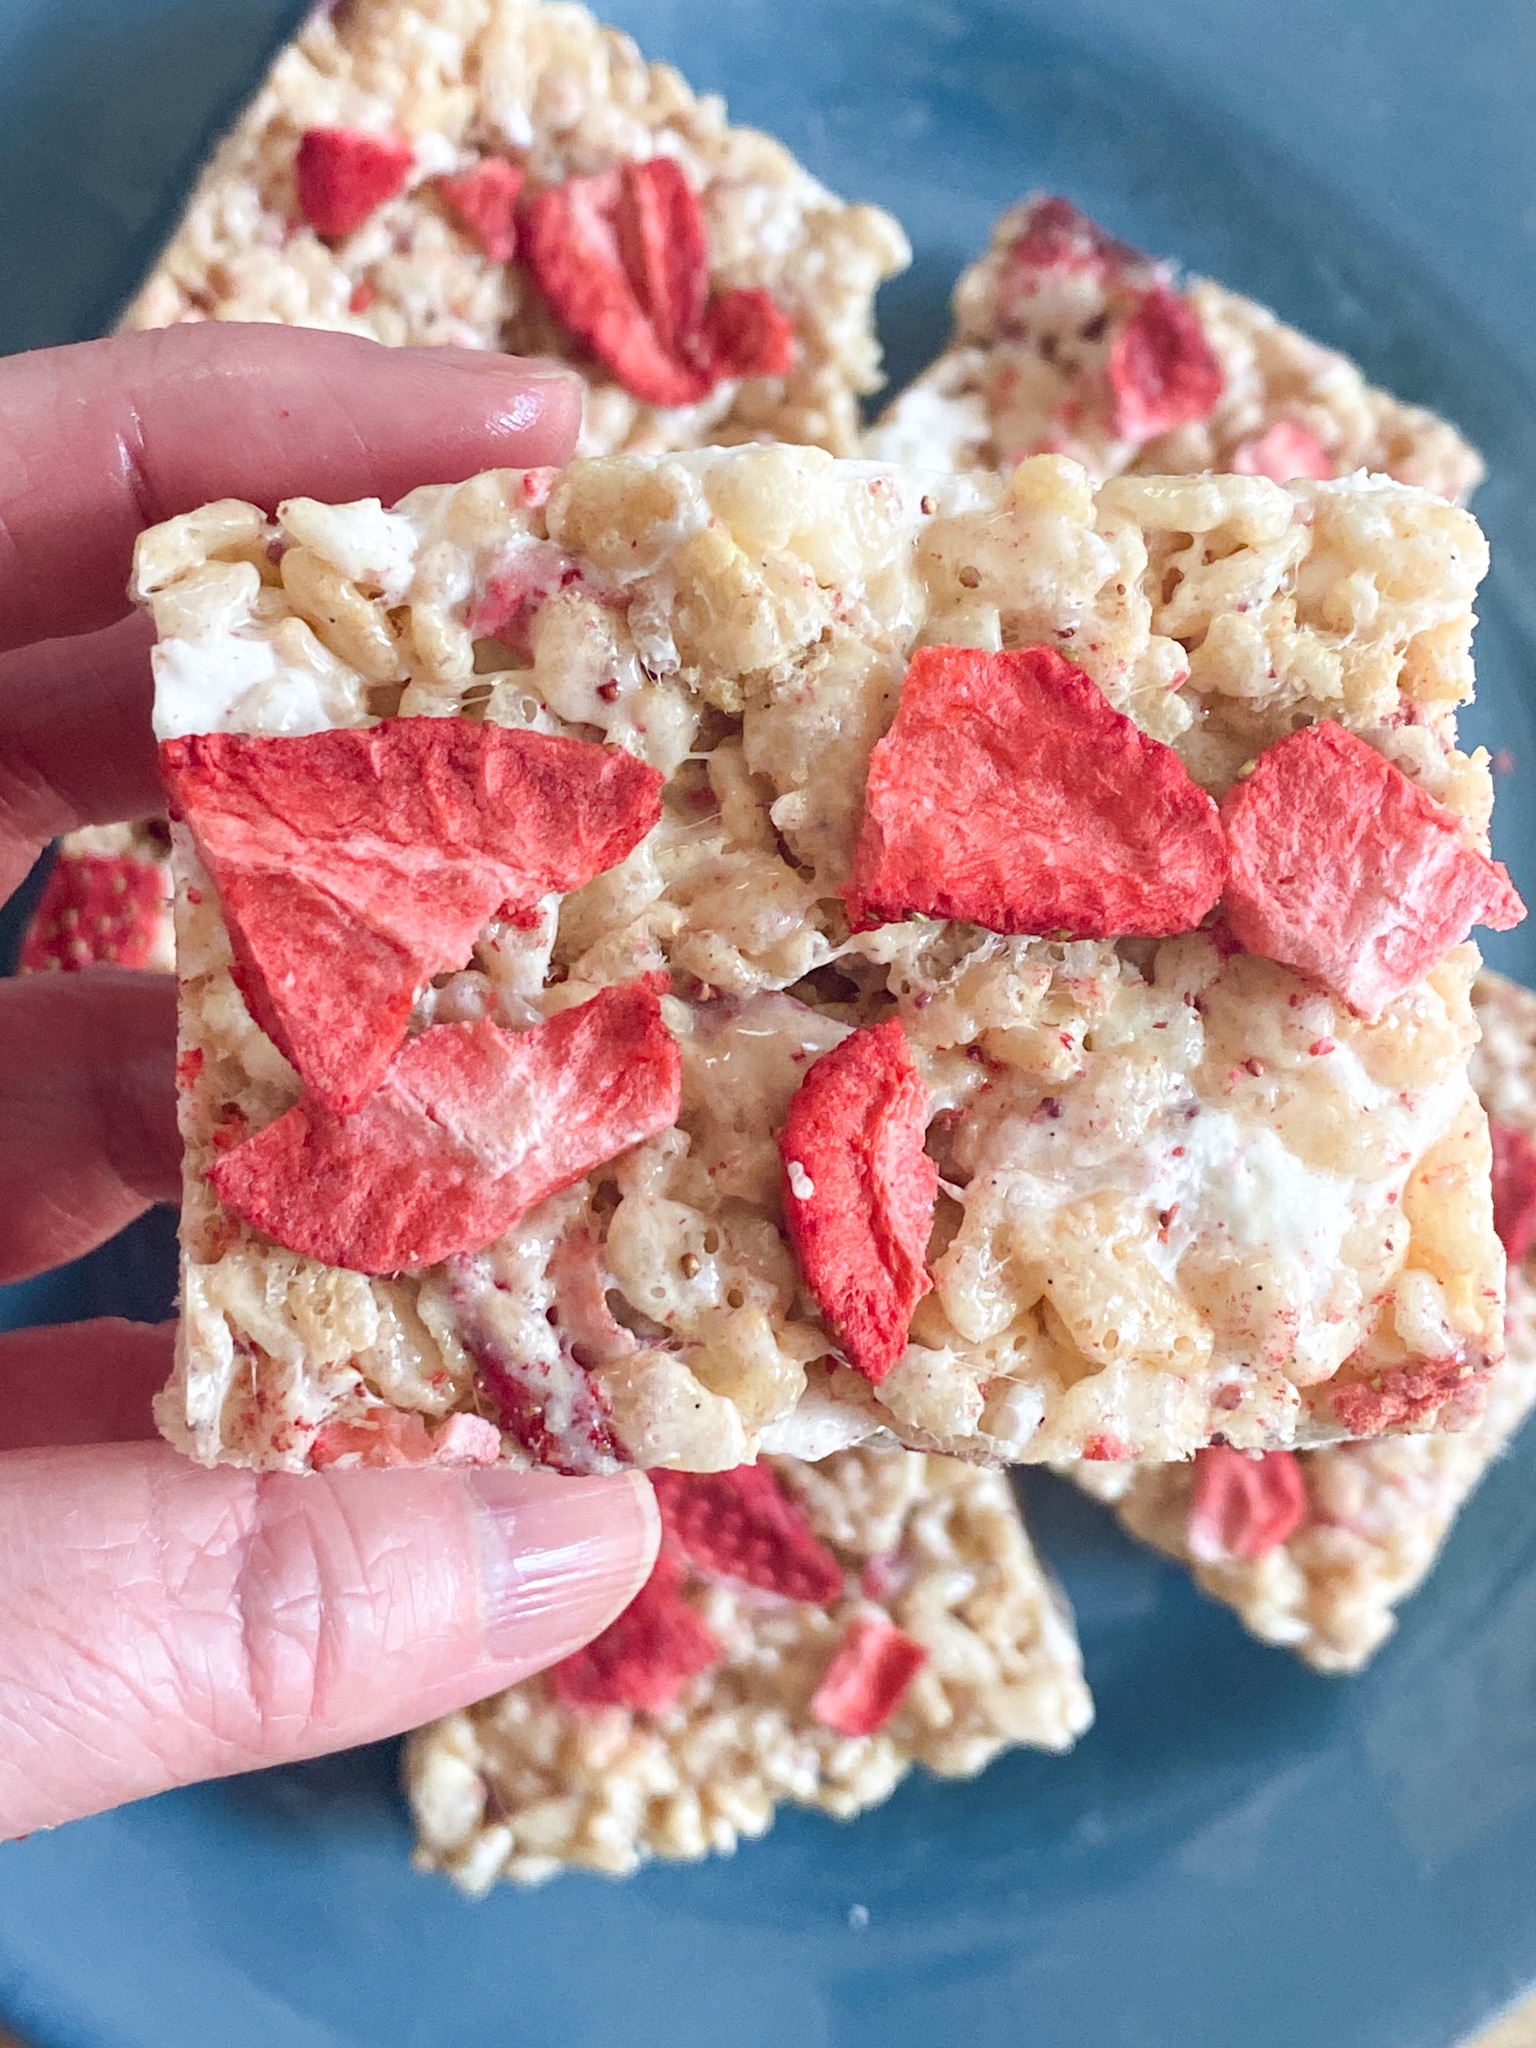 A rice krispie bar topped with freeze-dried strawberries held over a blue plate.